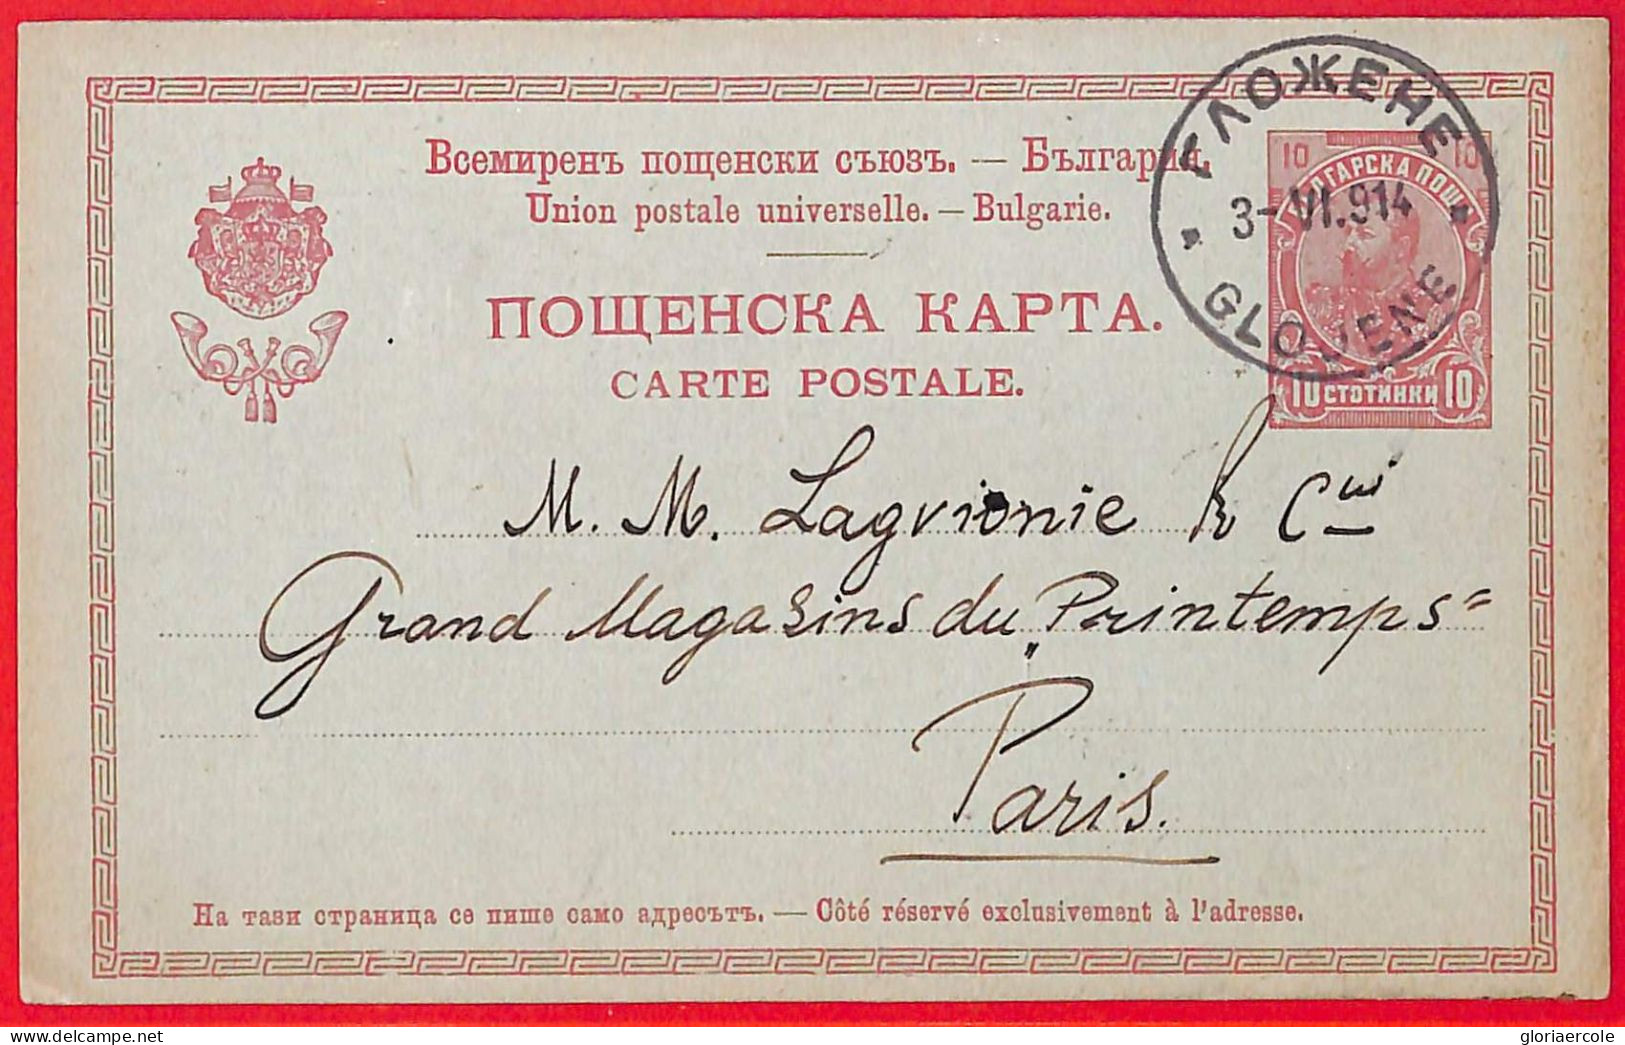 Aa0499 - BULGARIA - Postal History - STATIONERY CARD From GLOSHENE  To FRANCE  1914 - Cartes Postales